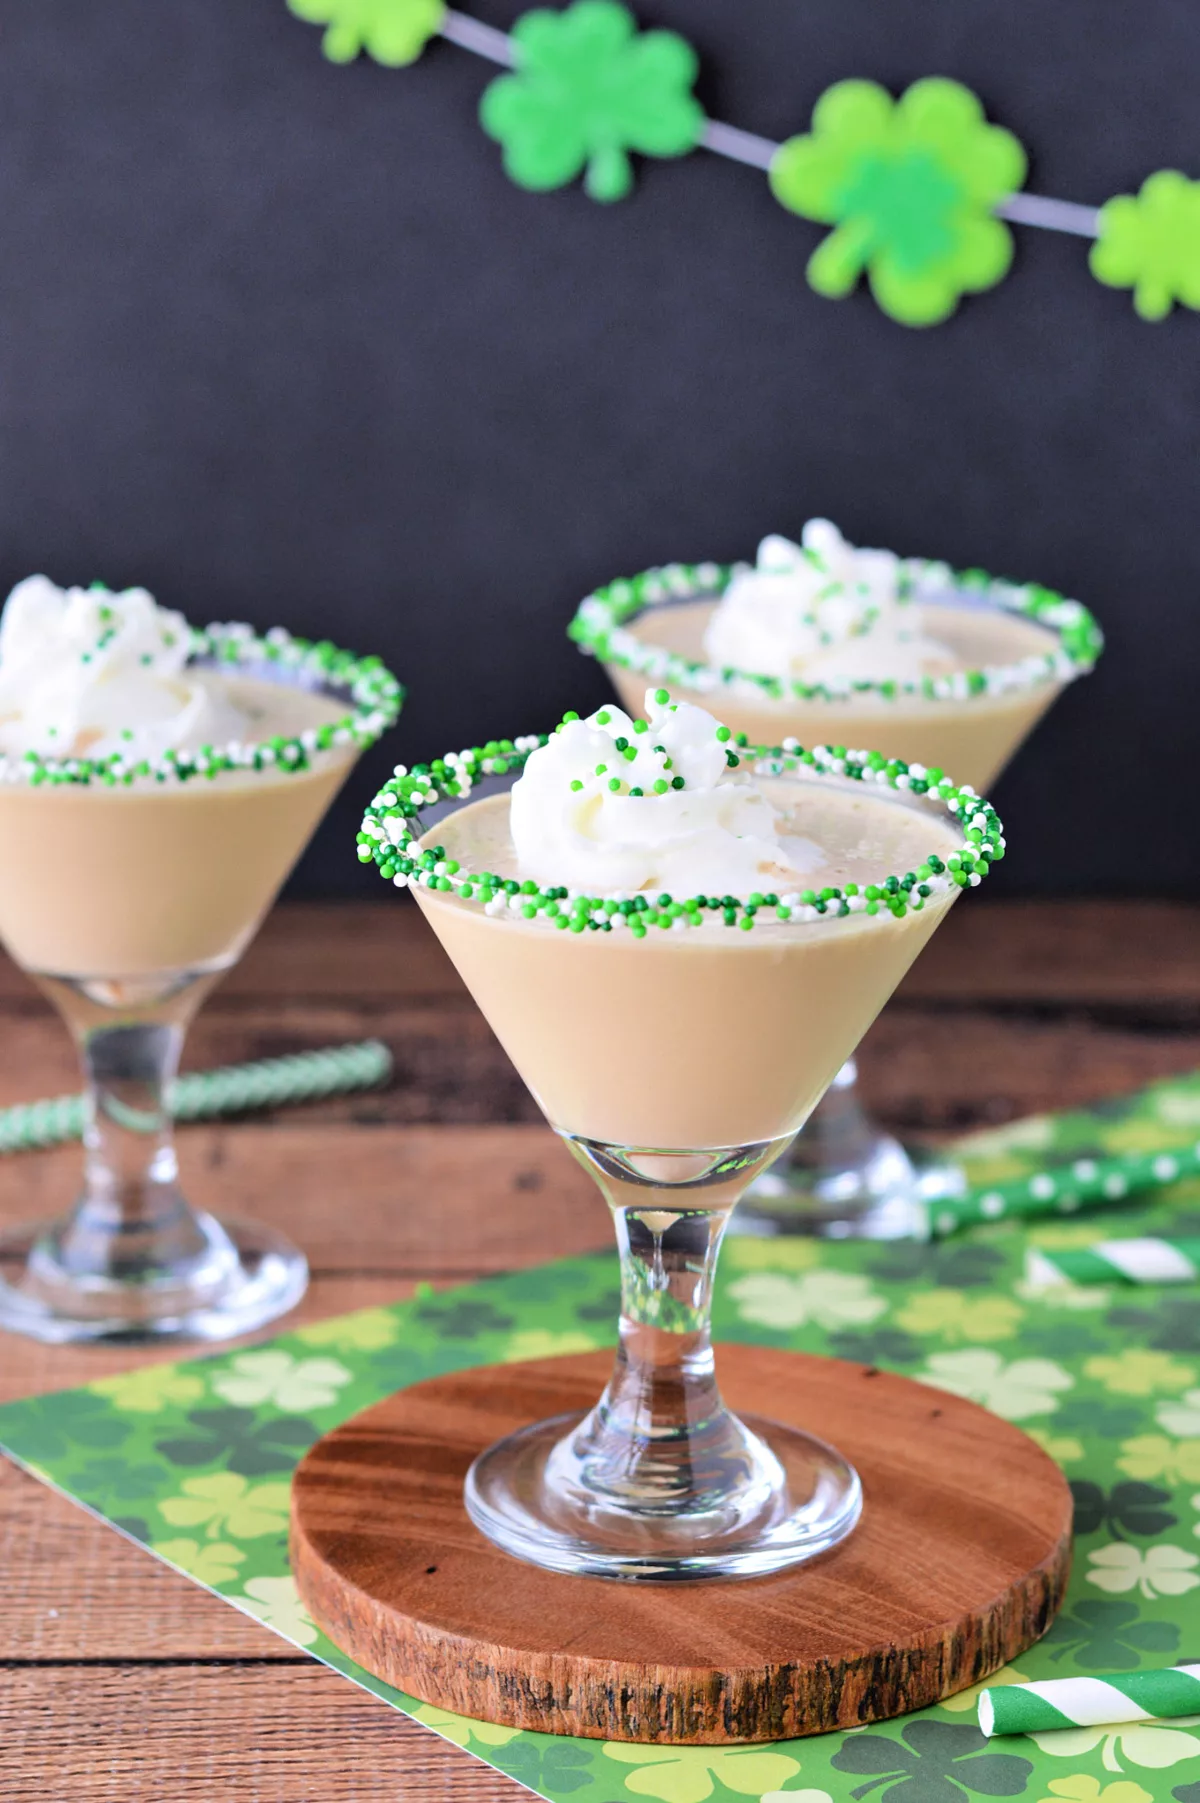 three martini glasses filled with baileys and topped with whipped cream and the rims are sprinkled with green sprinkles